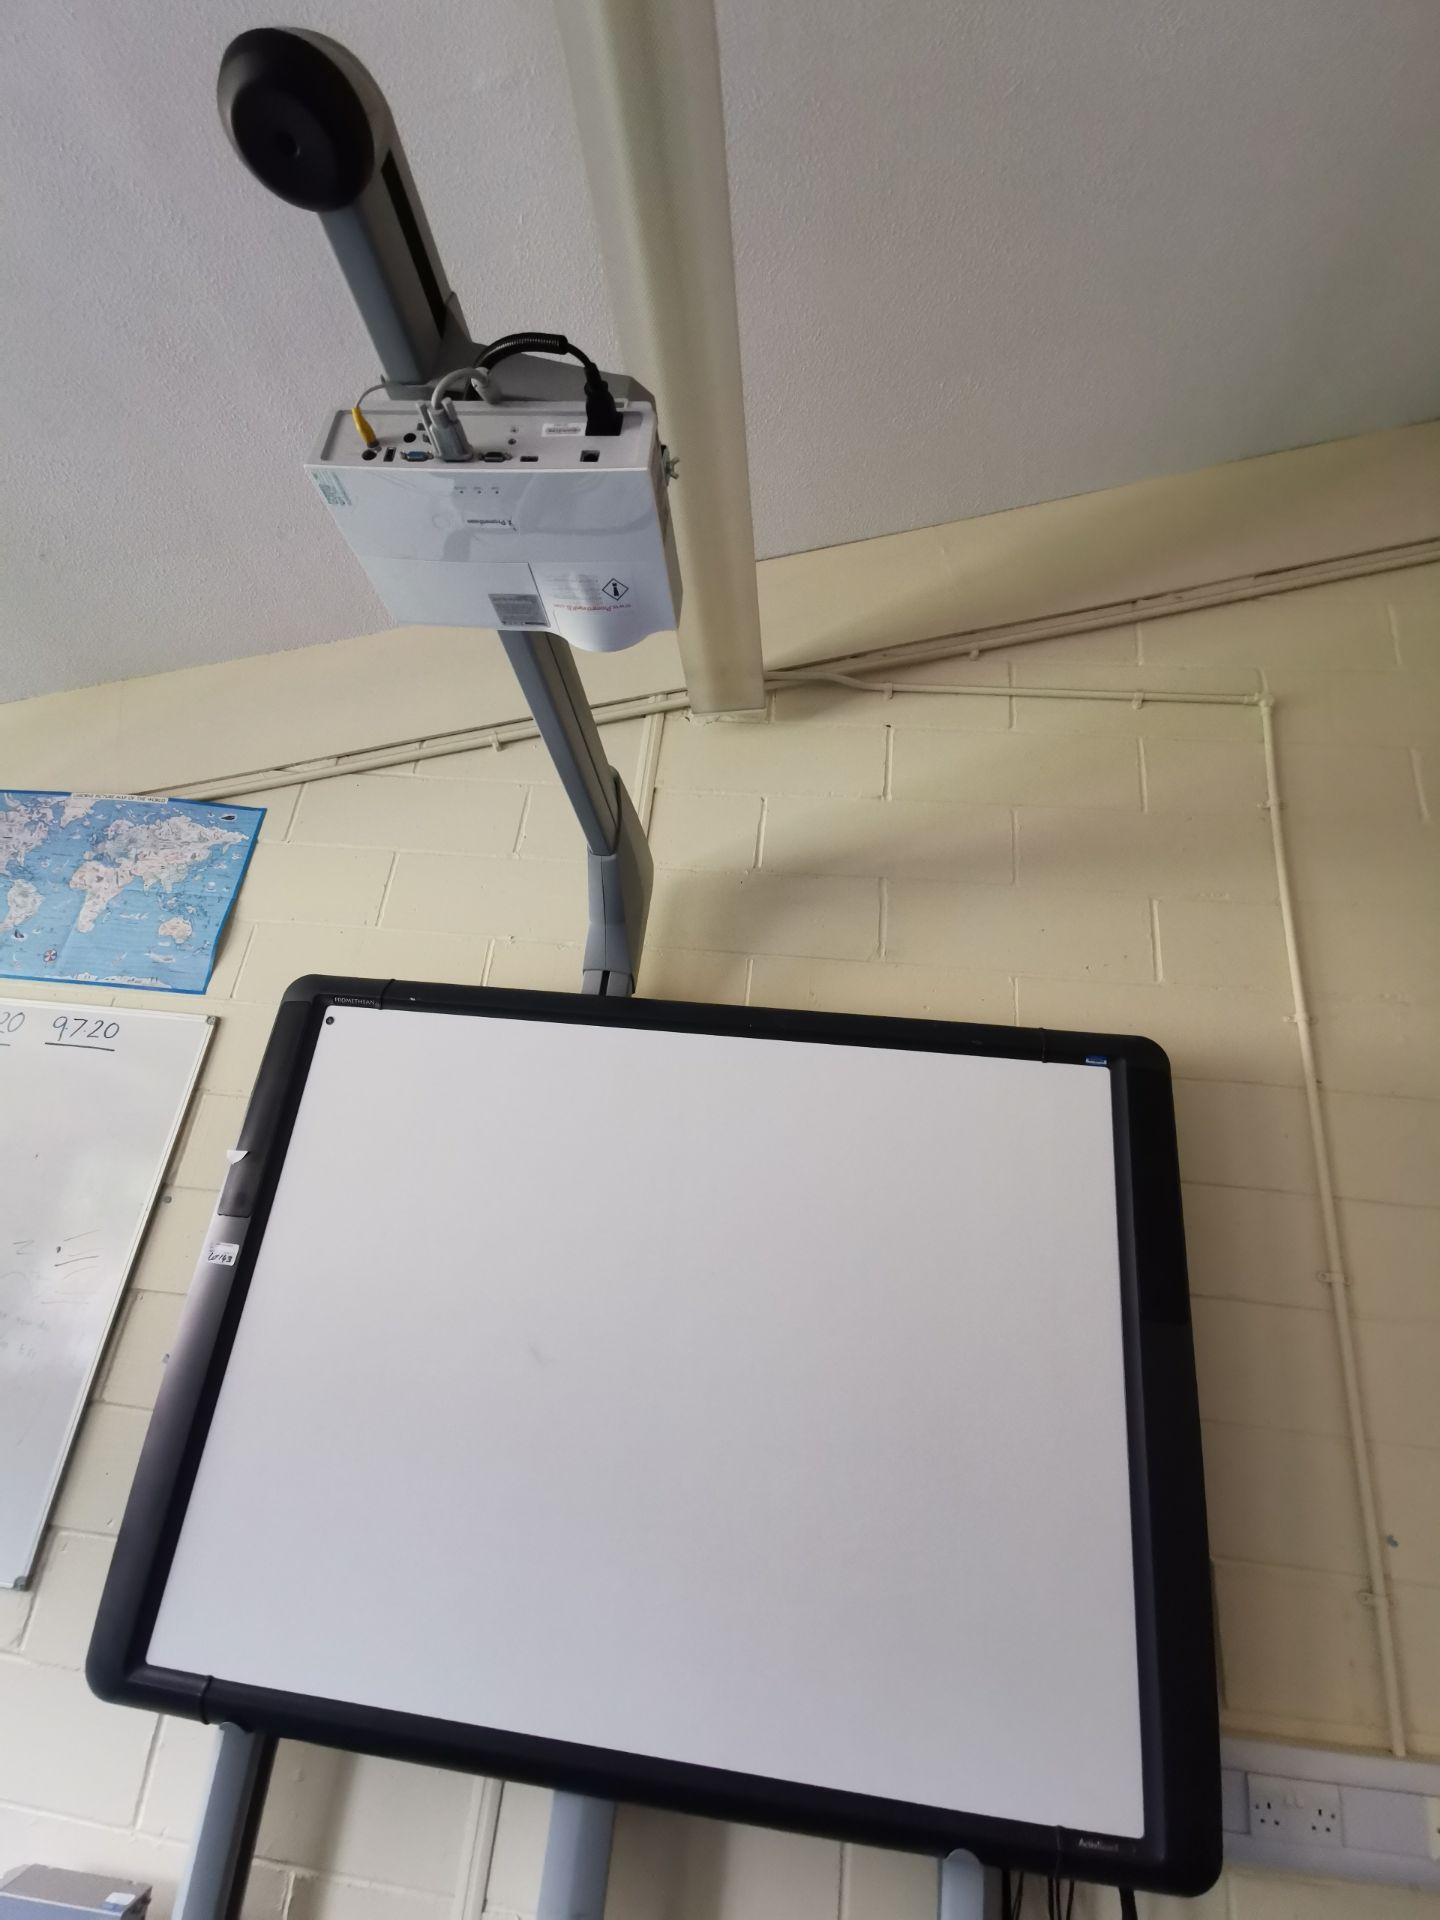 Promethean active board, projector and speakers [on stand]